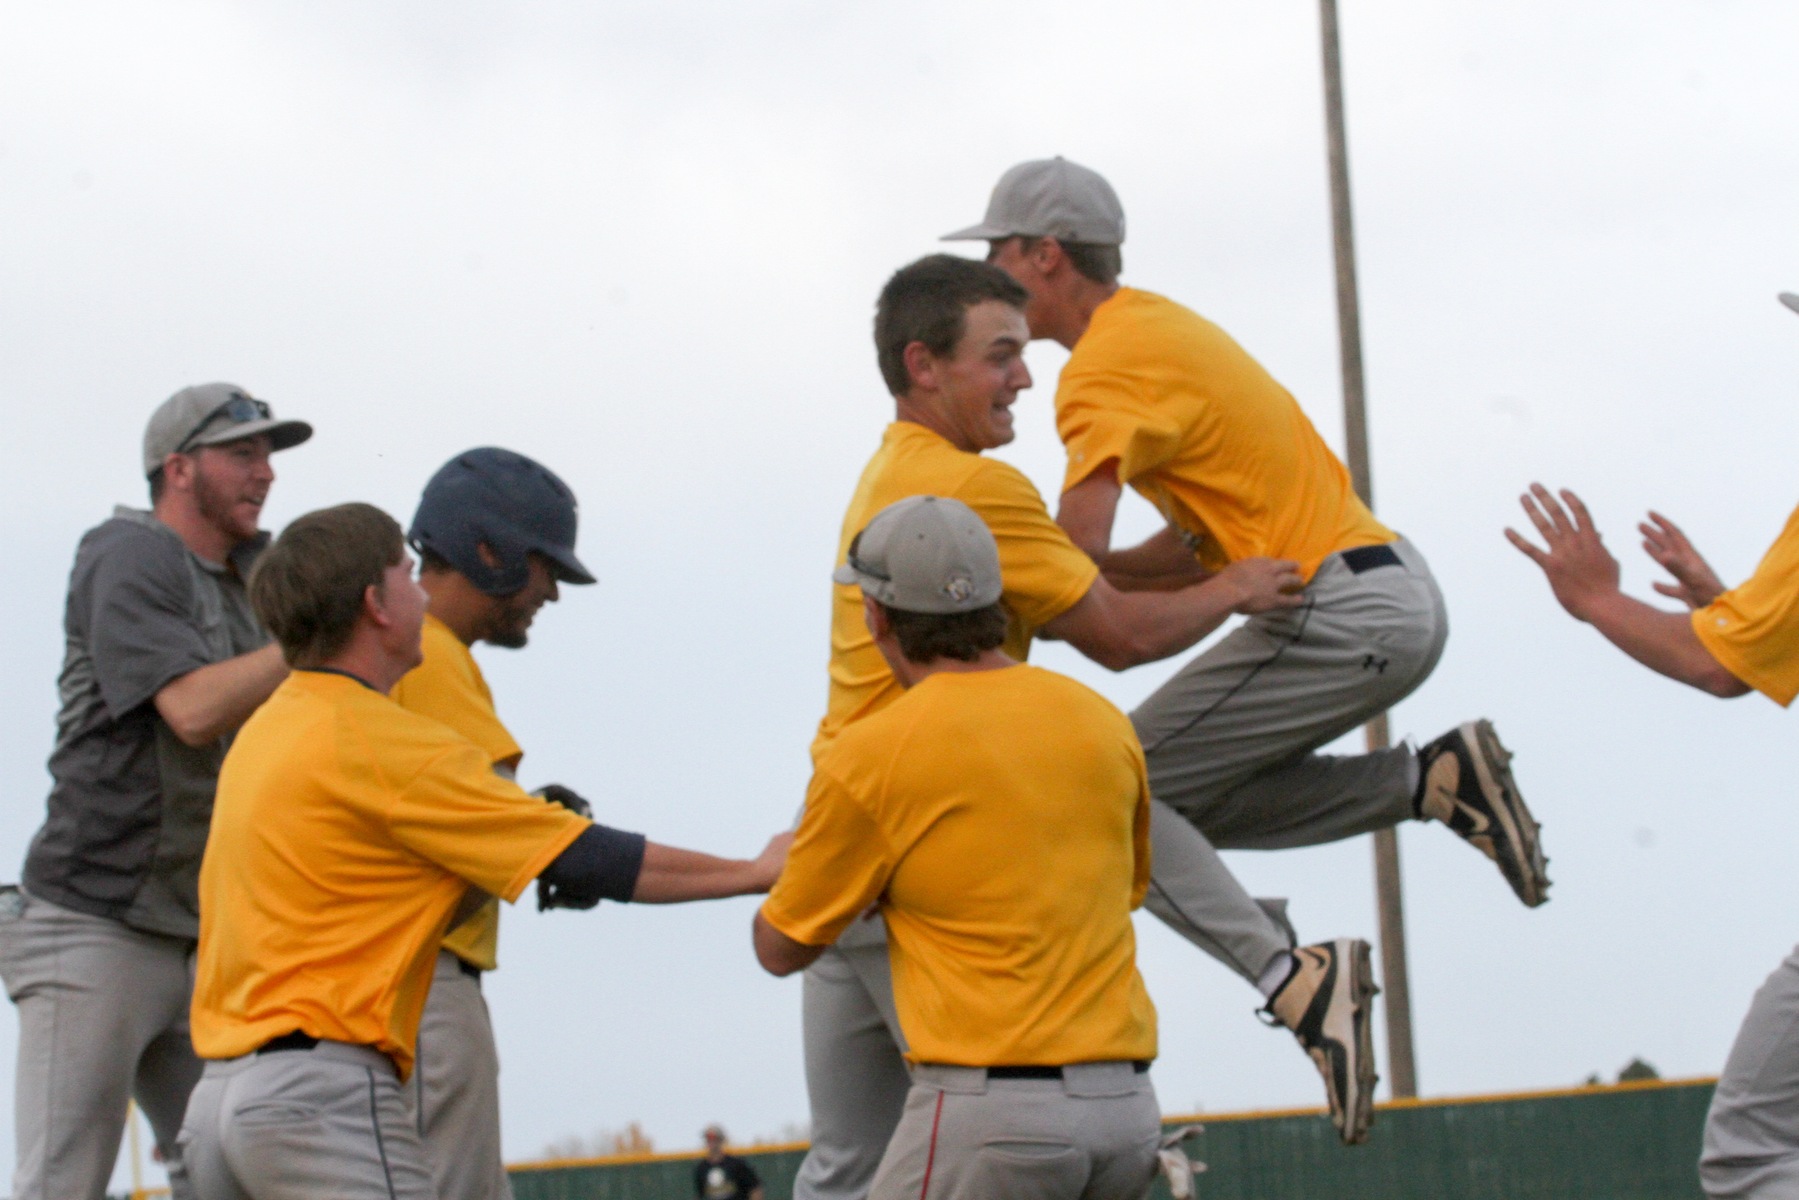 WNCC downs Lamar, wins Empire Conference and hosts regionals